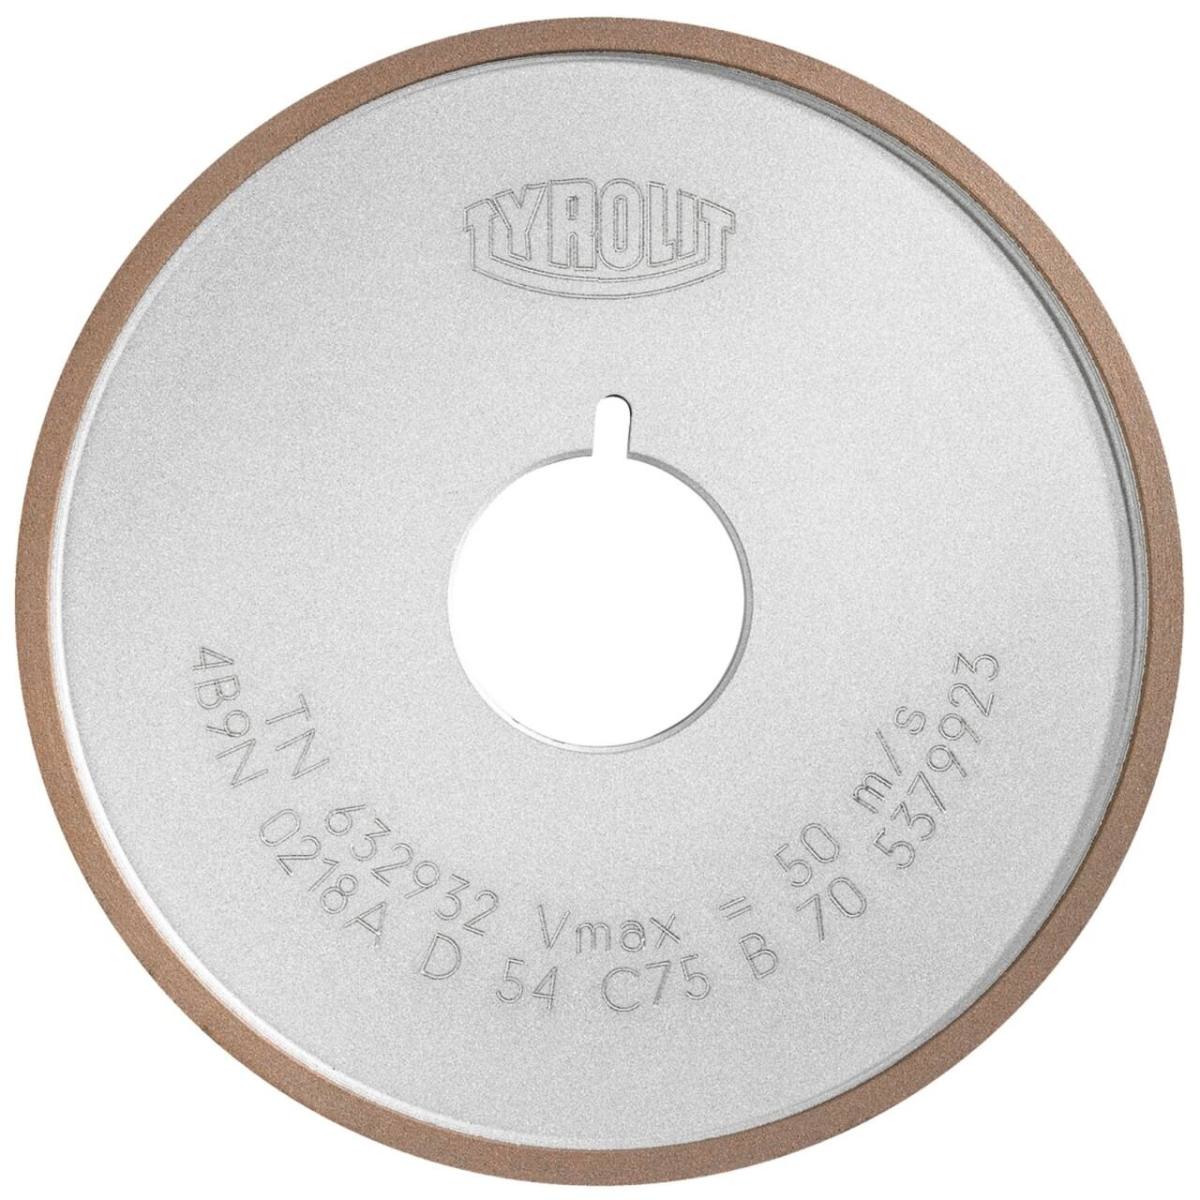 Tyrolit Resin-bonded diamond discs for chip removal (face grinding) DxDxH 125x12x32 For carbide, shape: 4B9, Art. 34015955